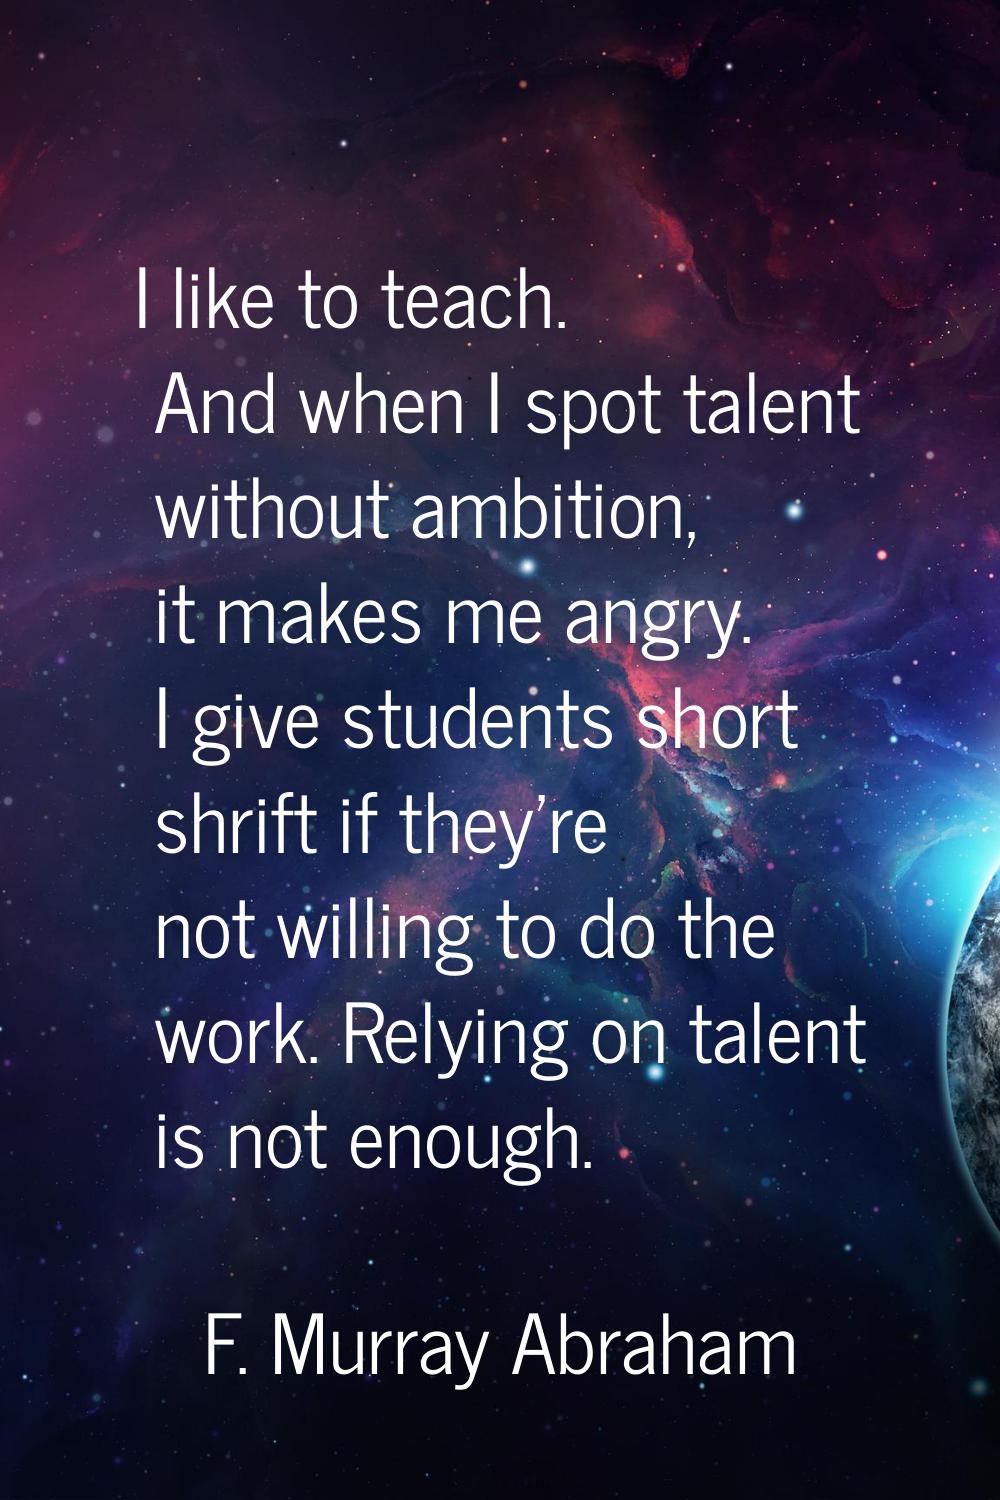 I like to teach. And when I spot talent without ambition, it makes me angry. I give students short 